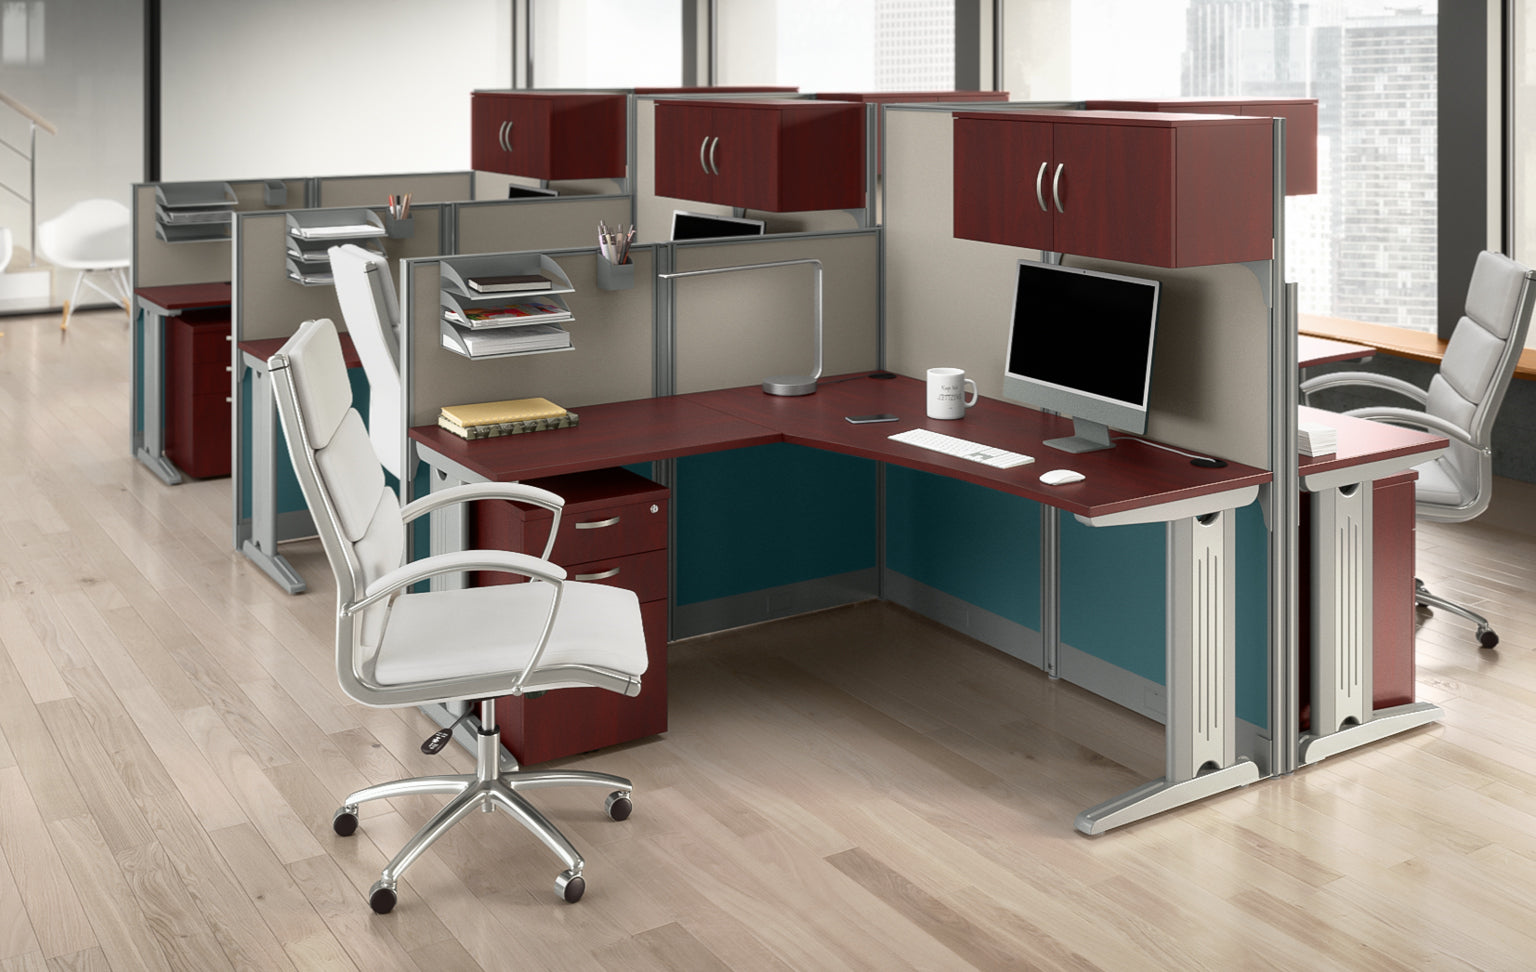 7 Tips on Finding the Best Commercial Office Furniture For Your Business